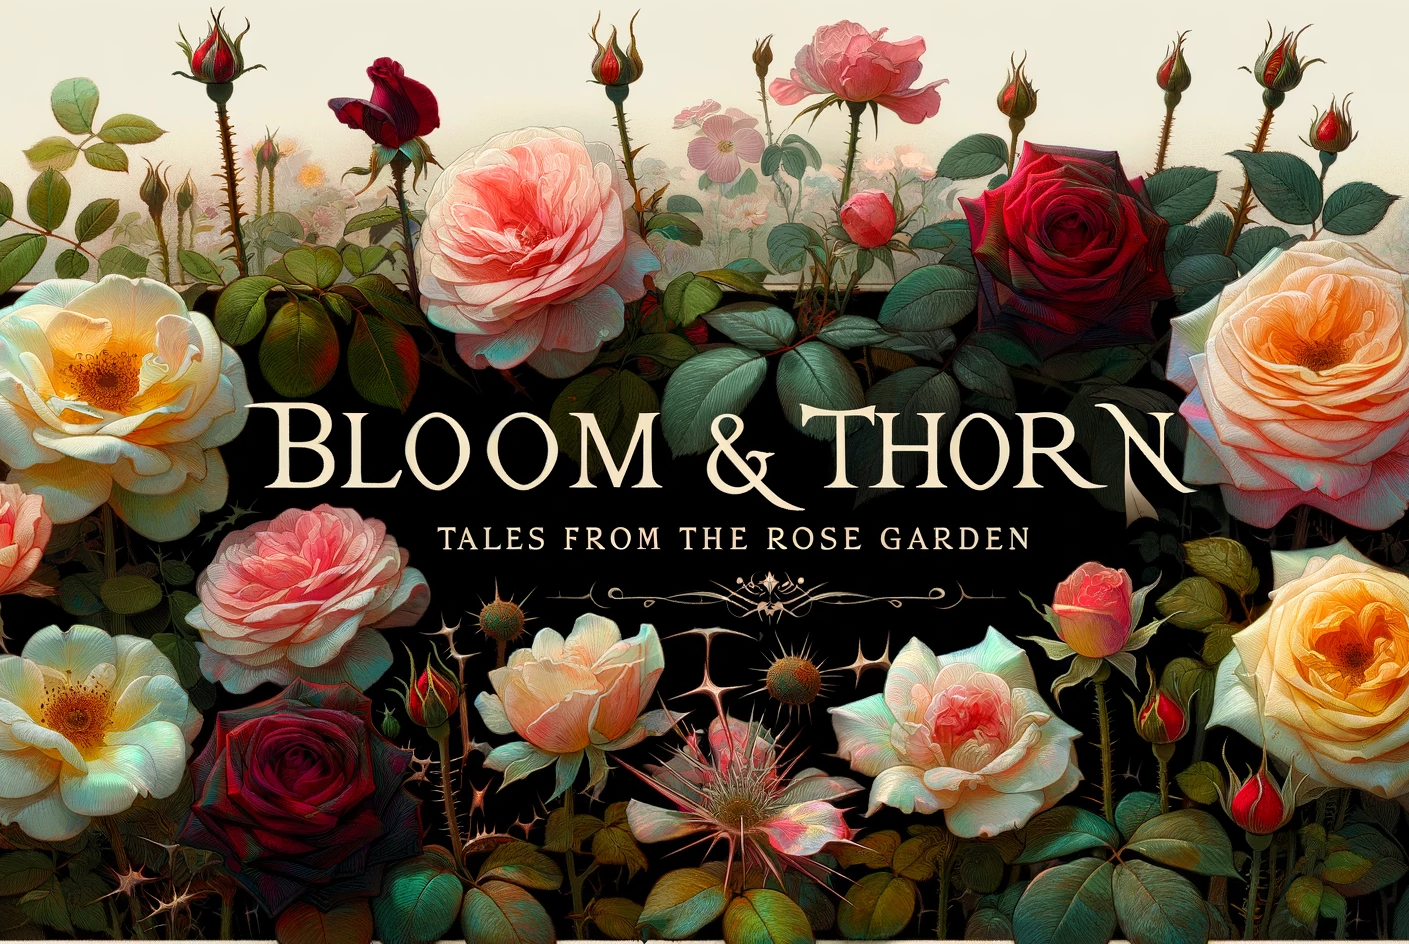 Bloom & Thorn: Tales from The Rose Garden